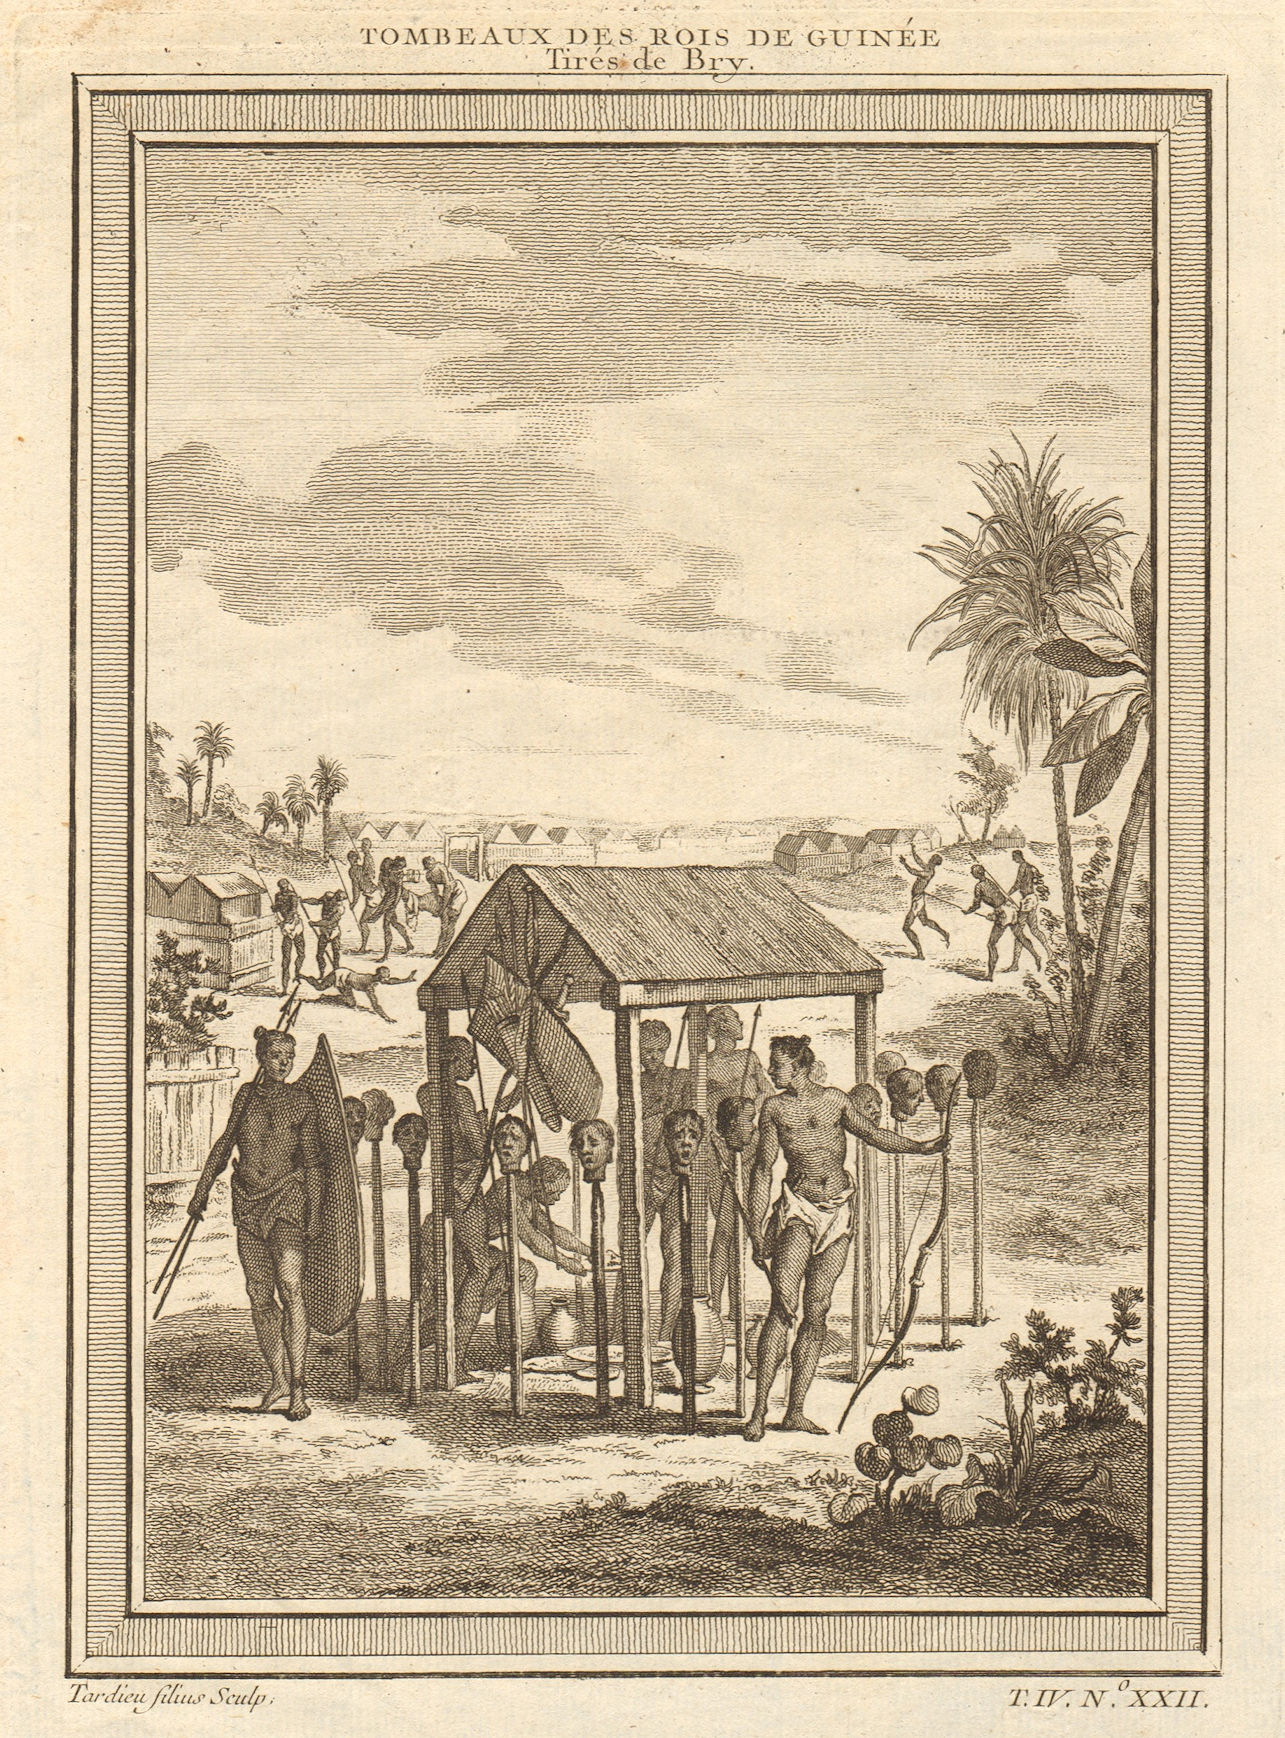 Associate Product West Africa. Shrines of the Kings of Guinea, from Bry. Heads on stakes 1747